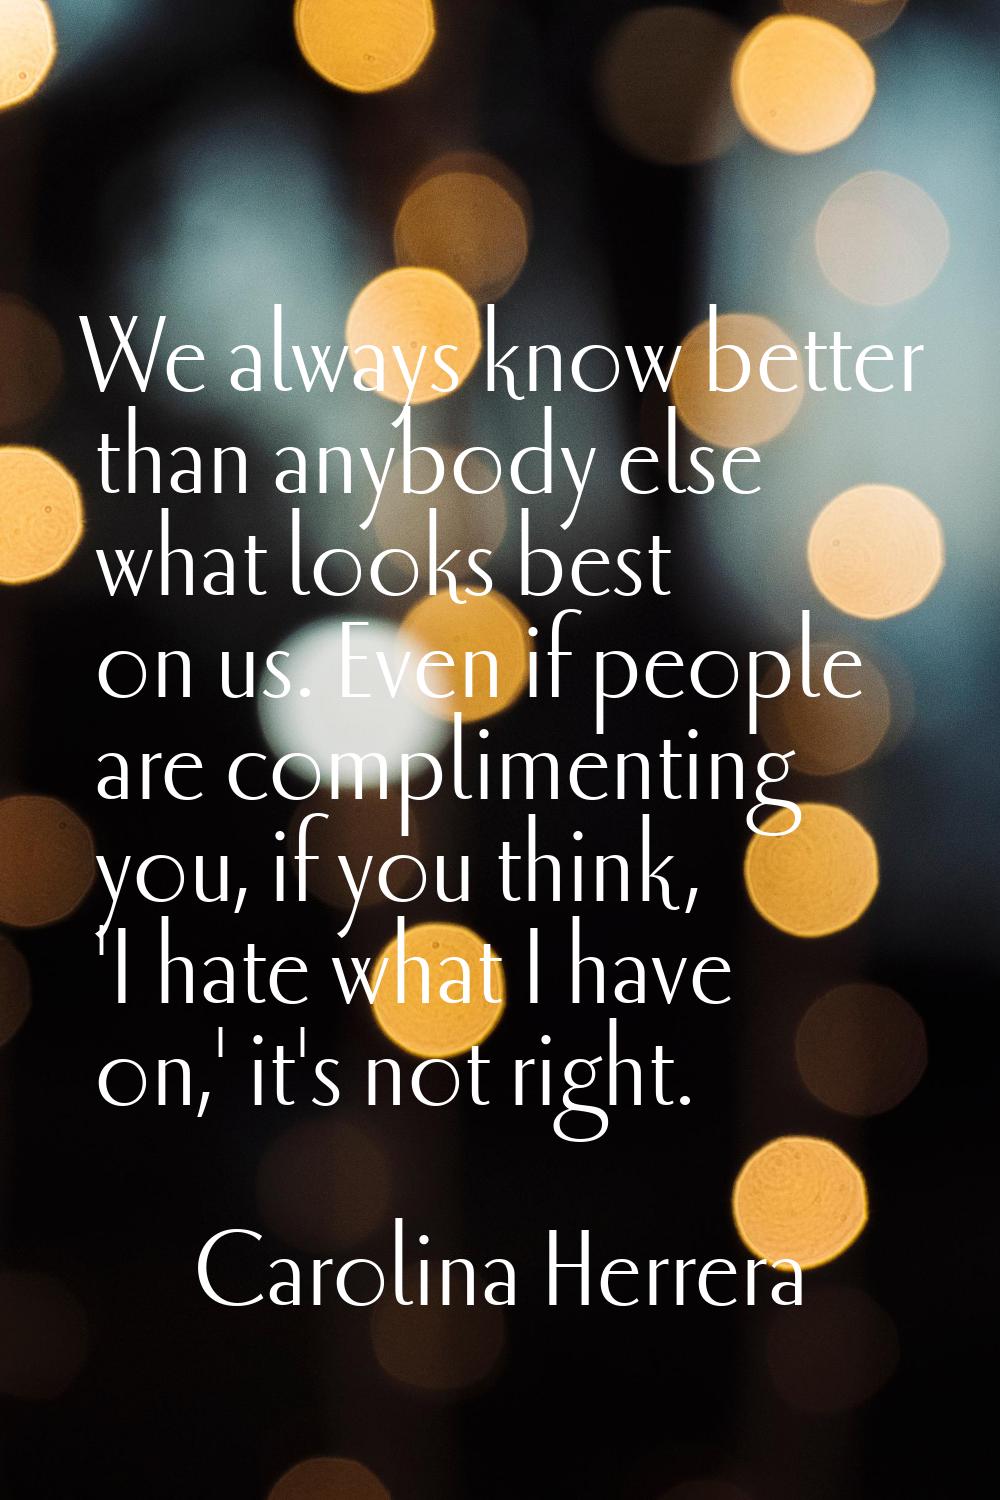 We always know better than anybody else what looks best on us. Even if people are complimenting you